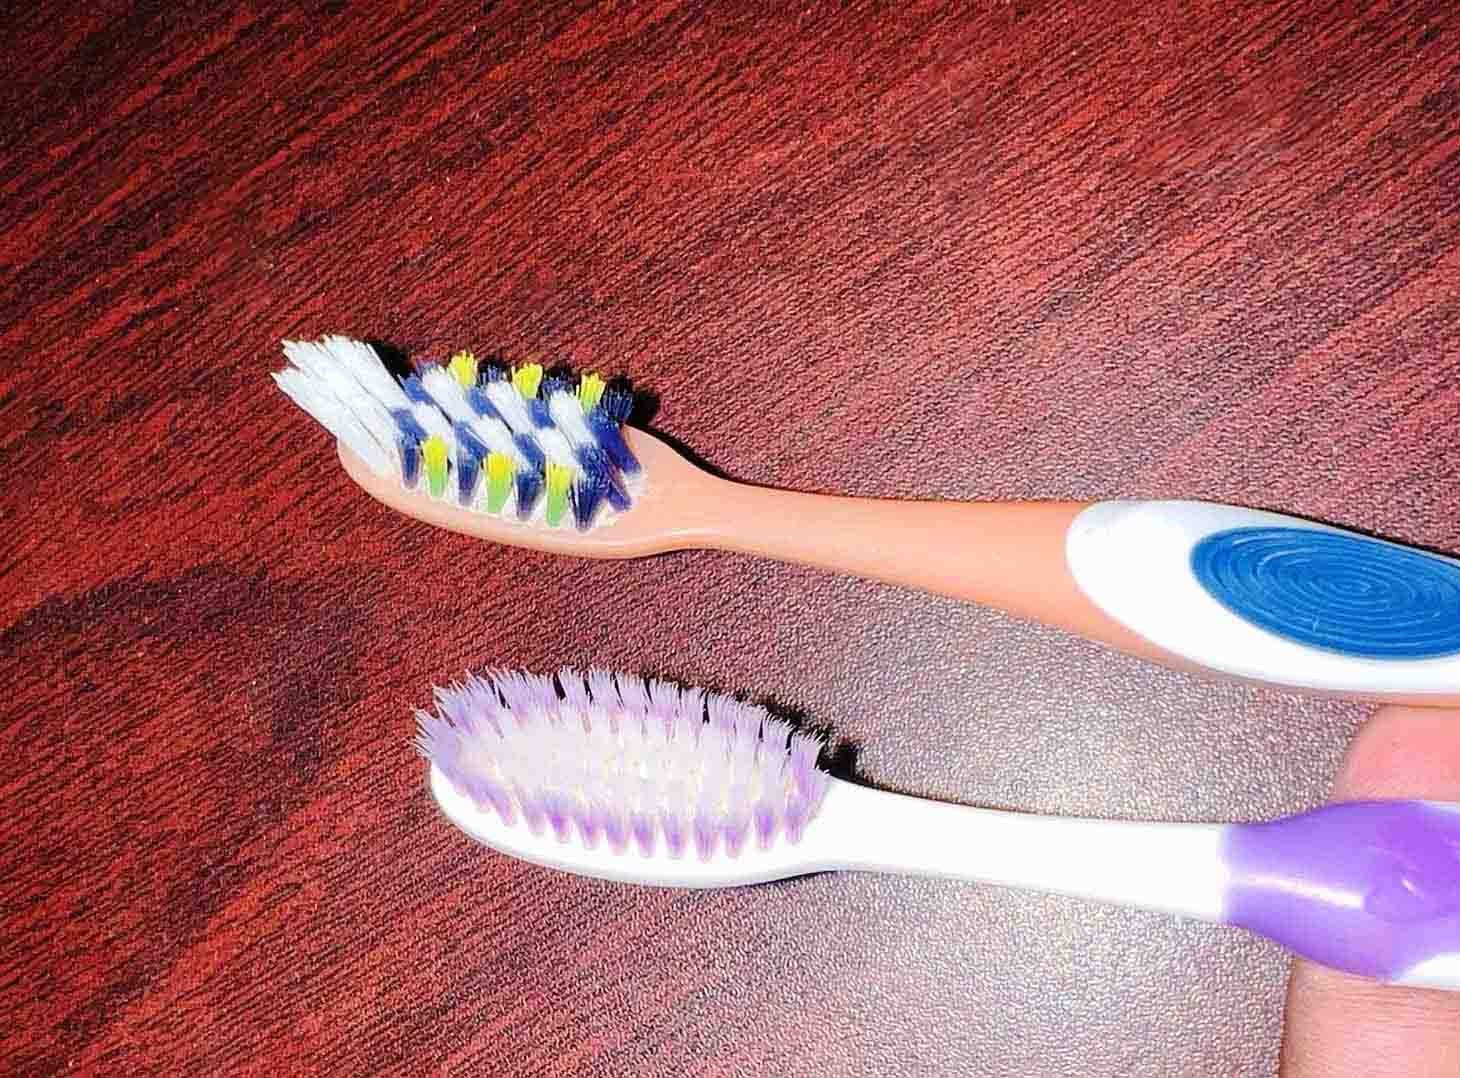 Why Do They Make Medium Toothbrushes?